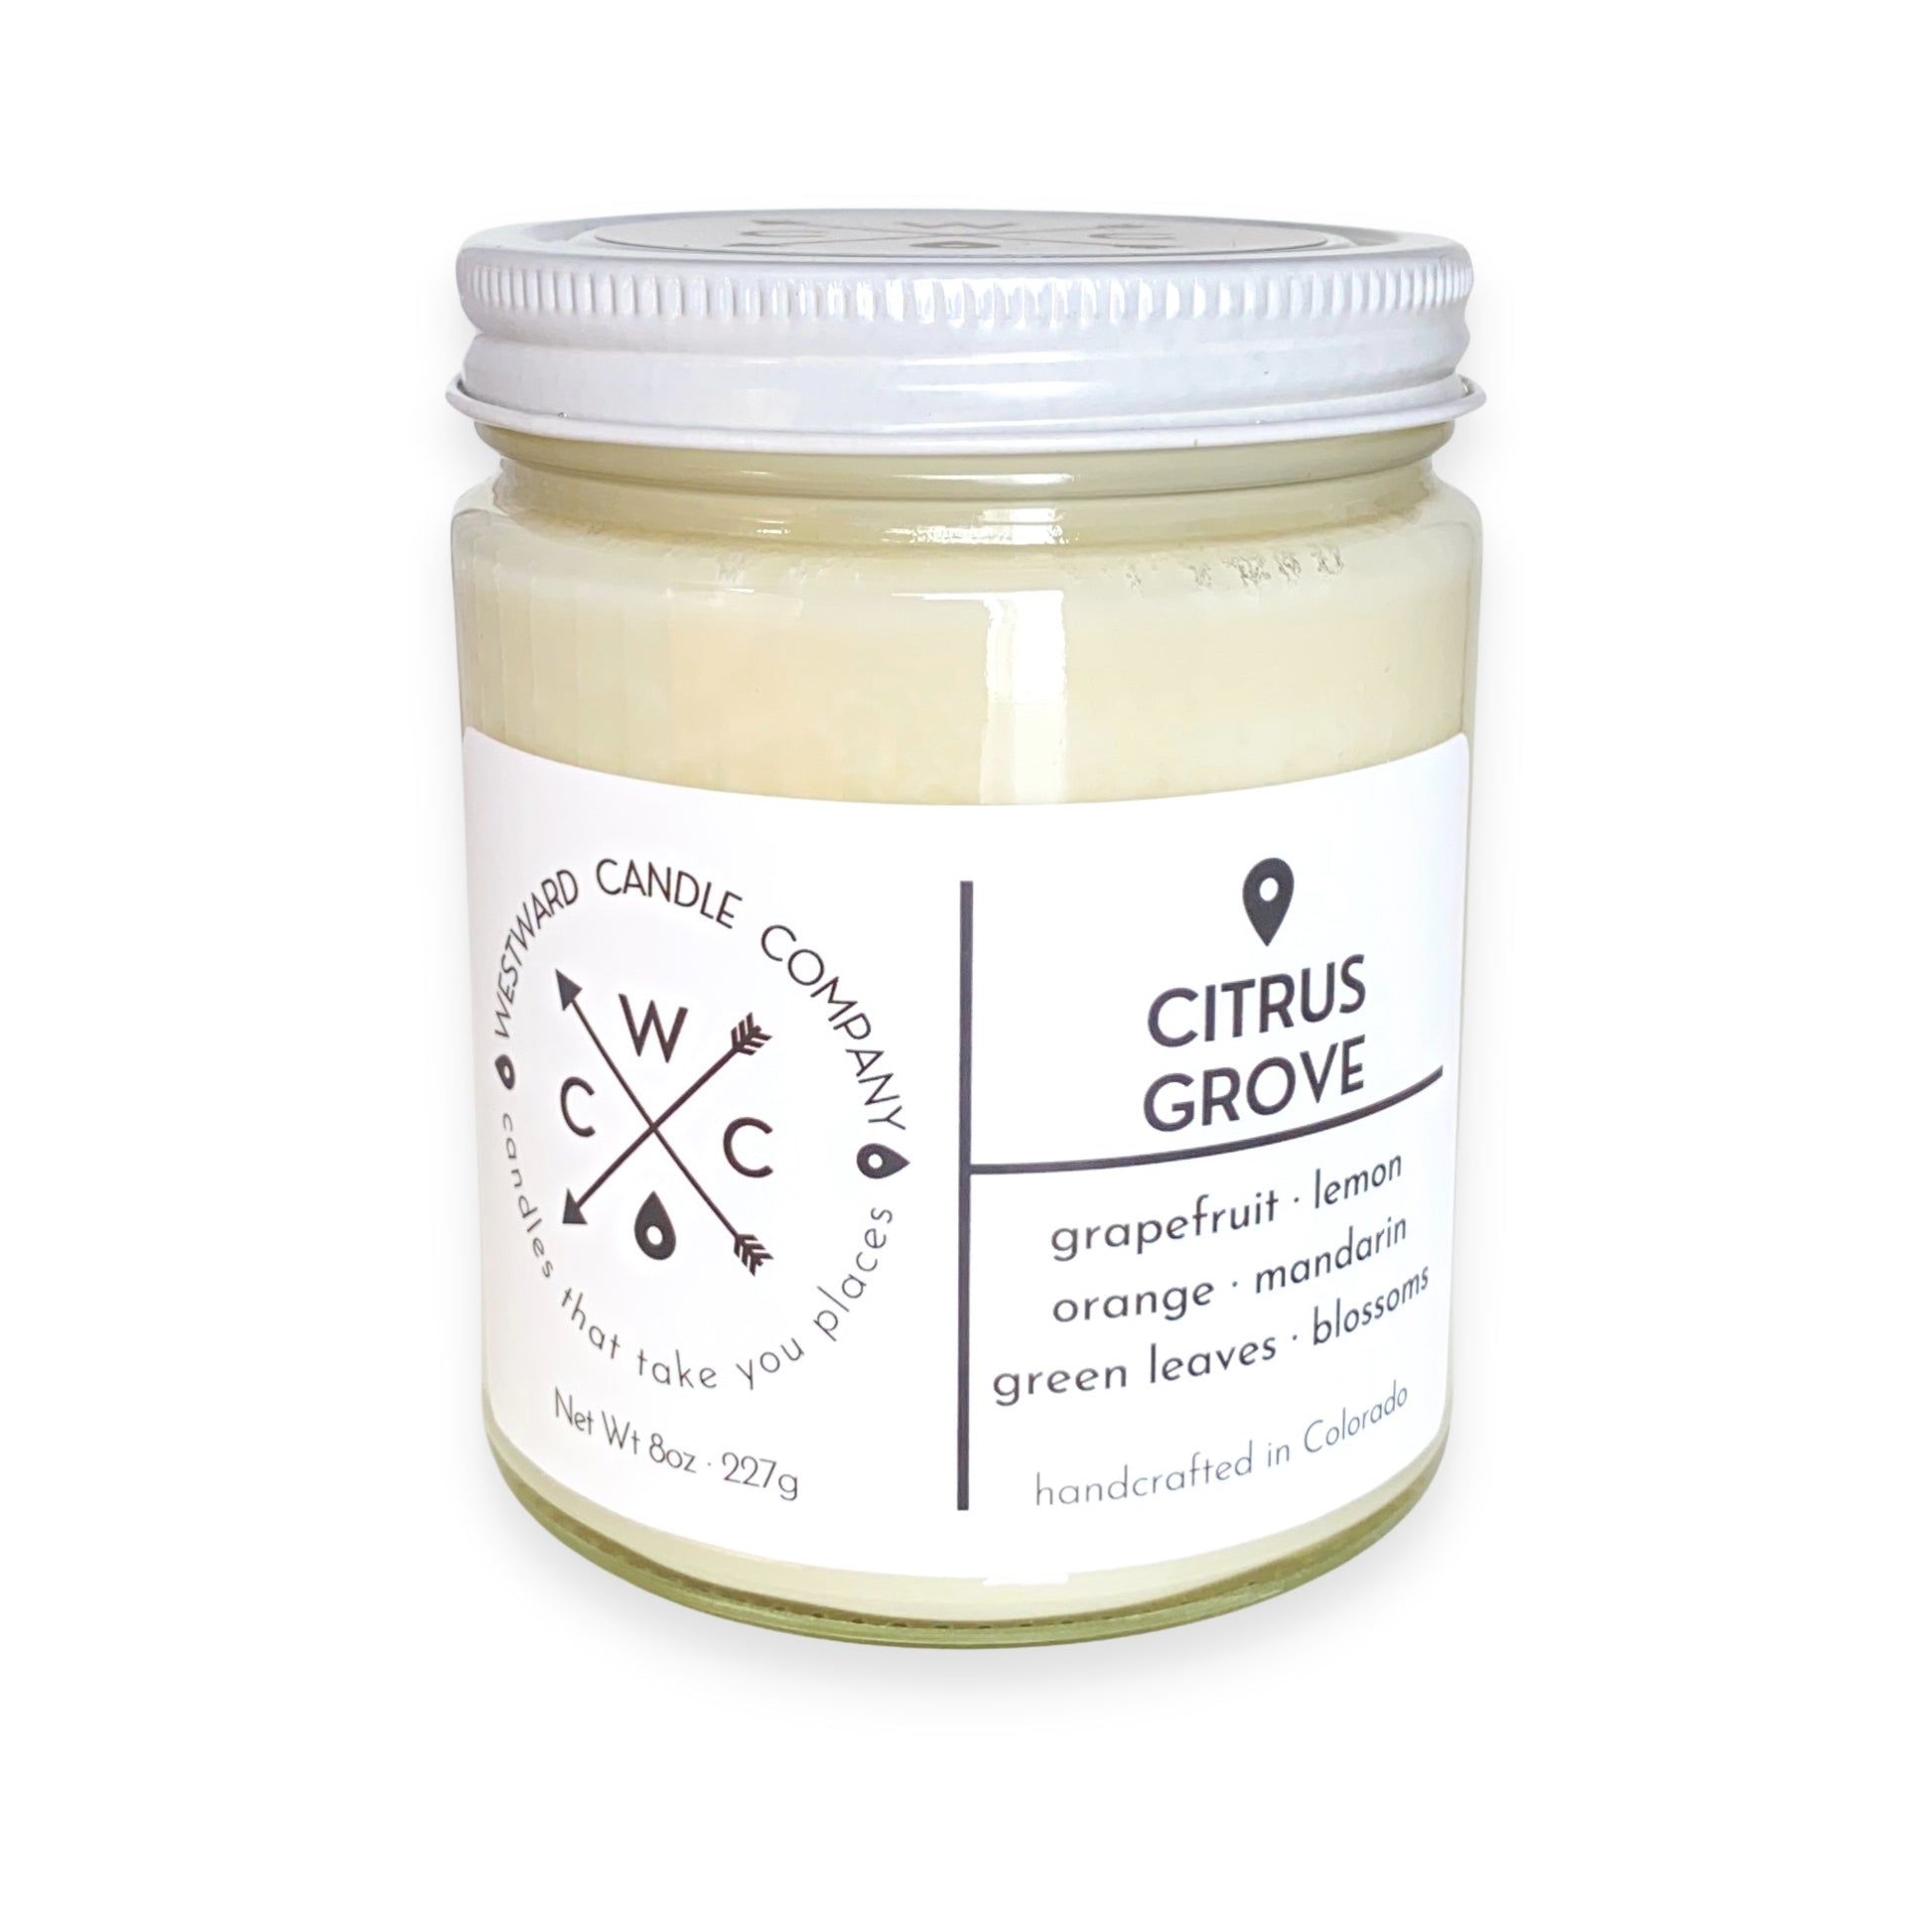 Citrus Grove Soy Candle - Westward Candle Company 